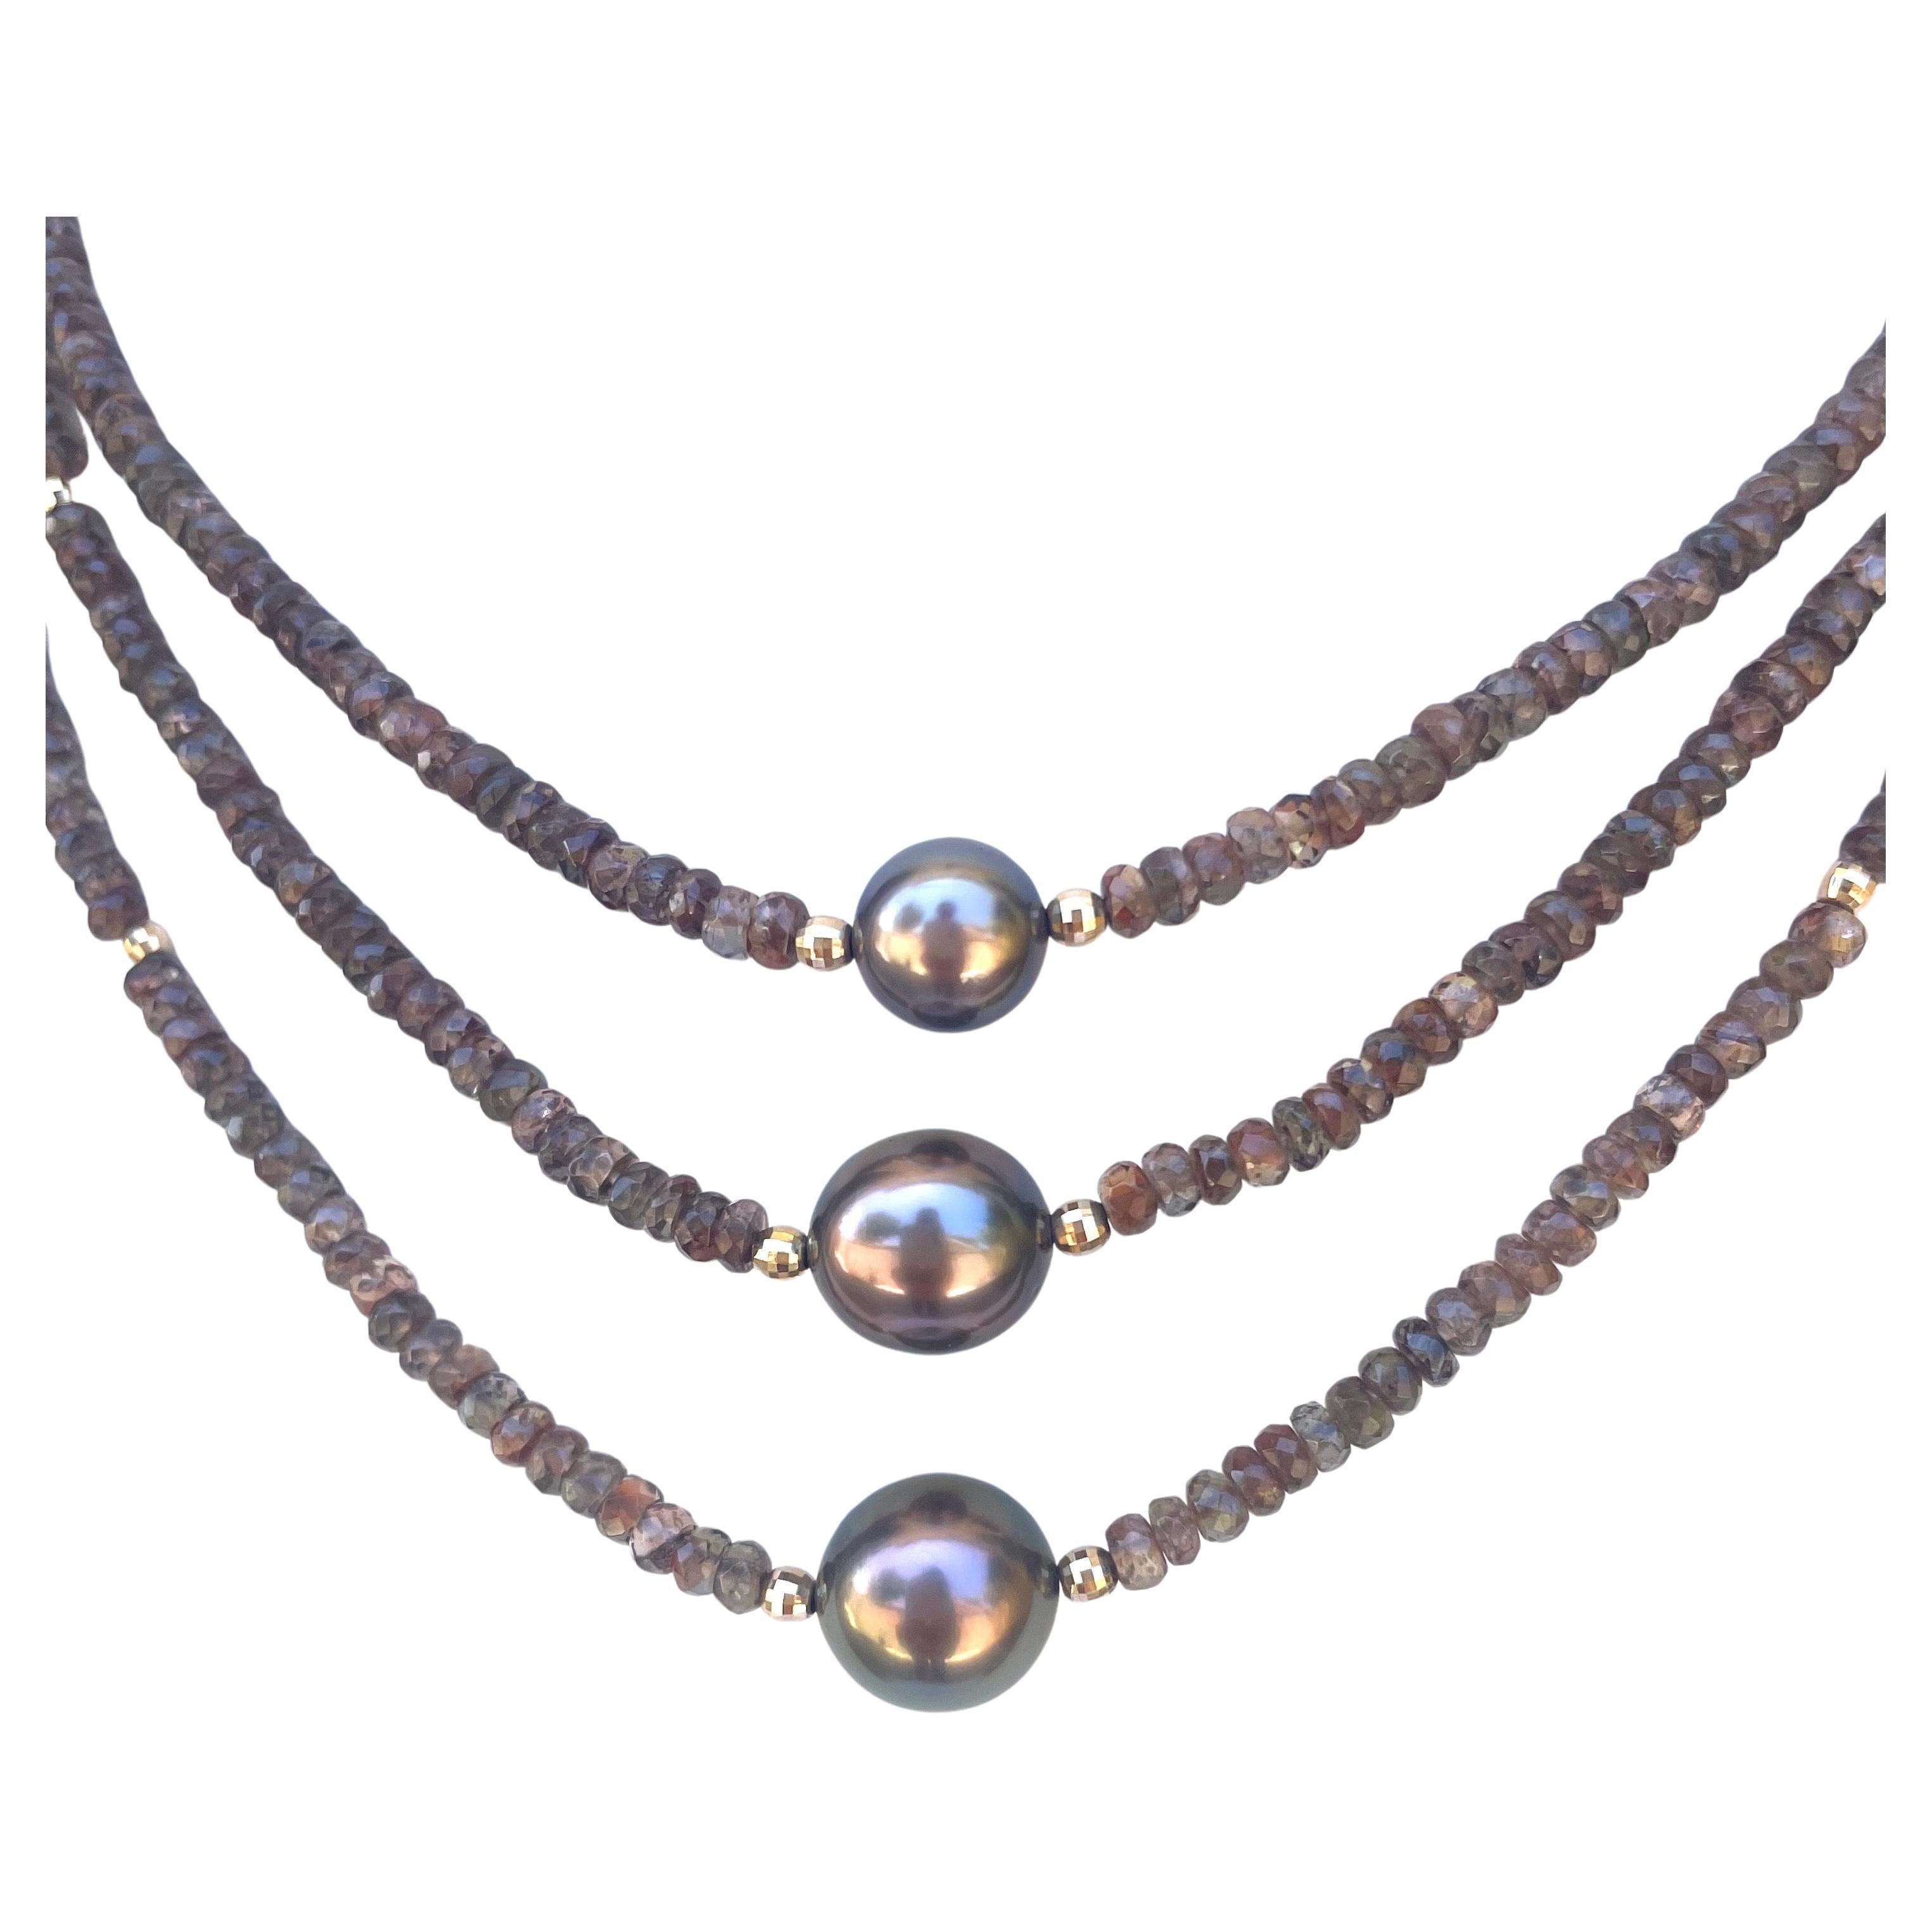 Description
Exquisite, rare Andalusite multi strand necklace in soft earthtones adorned with 3 exceptionally beautiful and rare copper color Tahitian pearls.
Item # N3744

Materials and Weight
Andalusite 4mm, 166cts, rondelle shape
Tahitian pearls